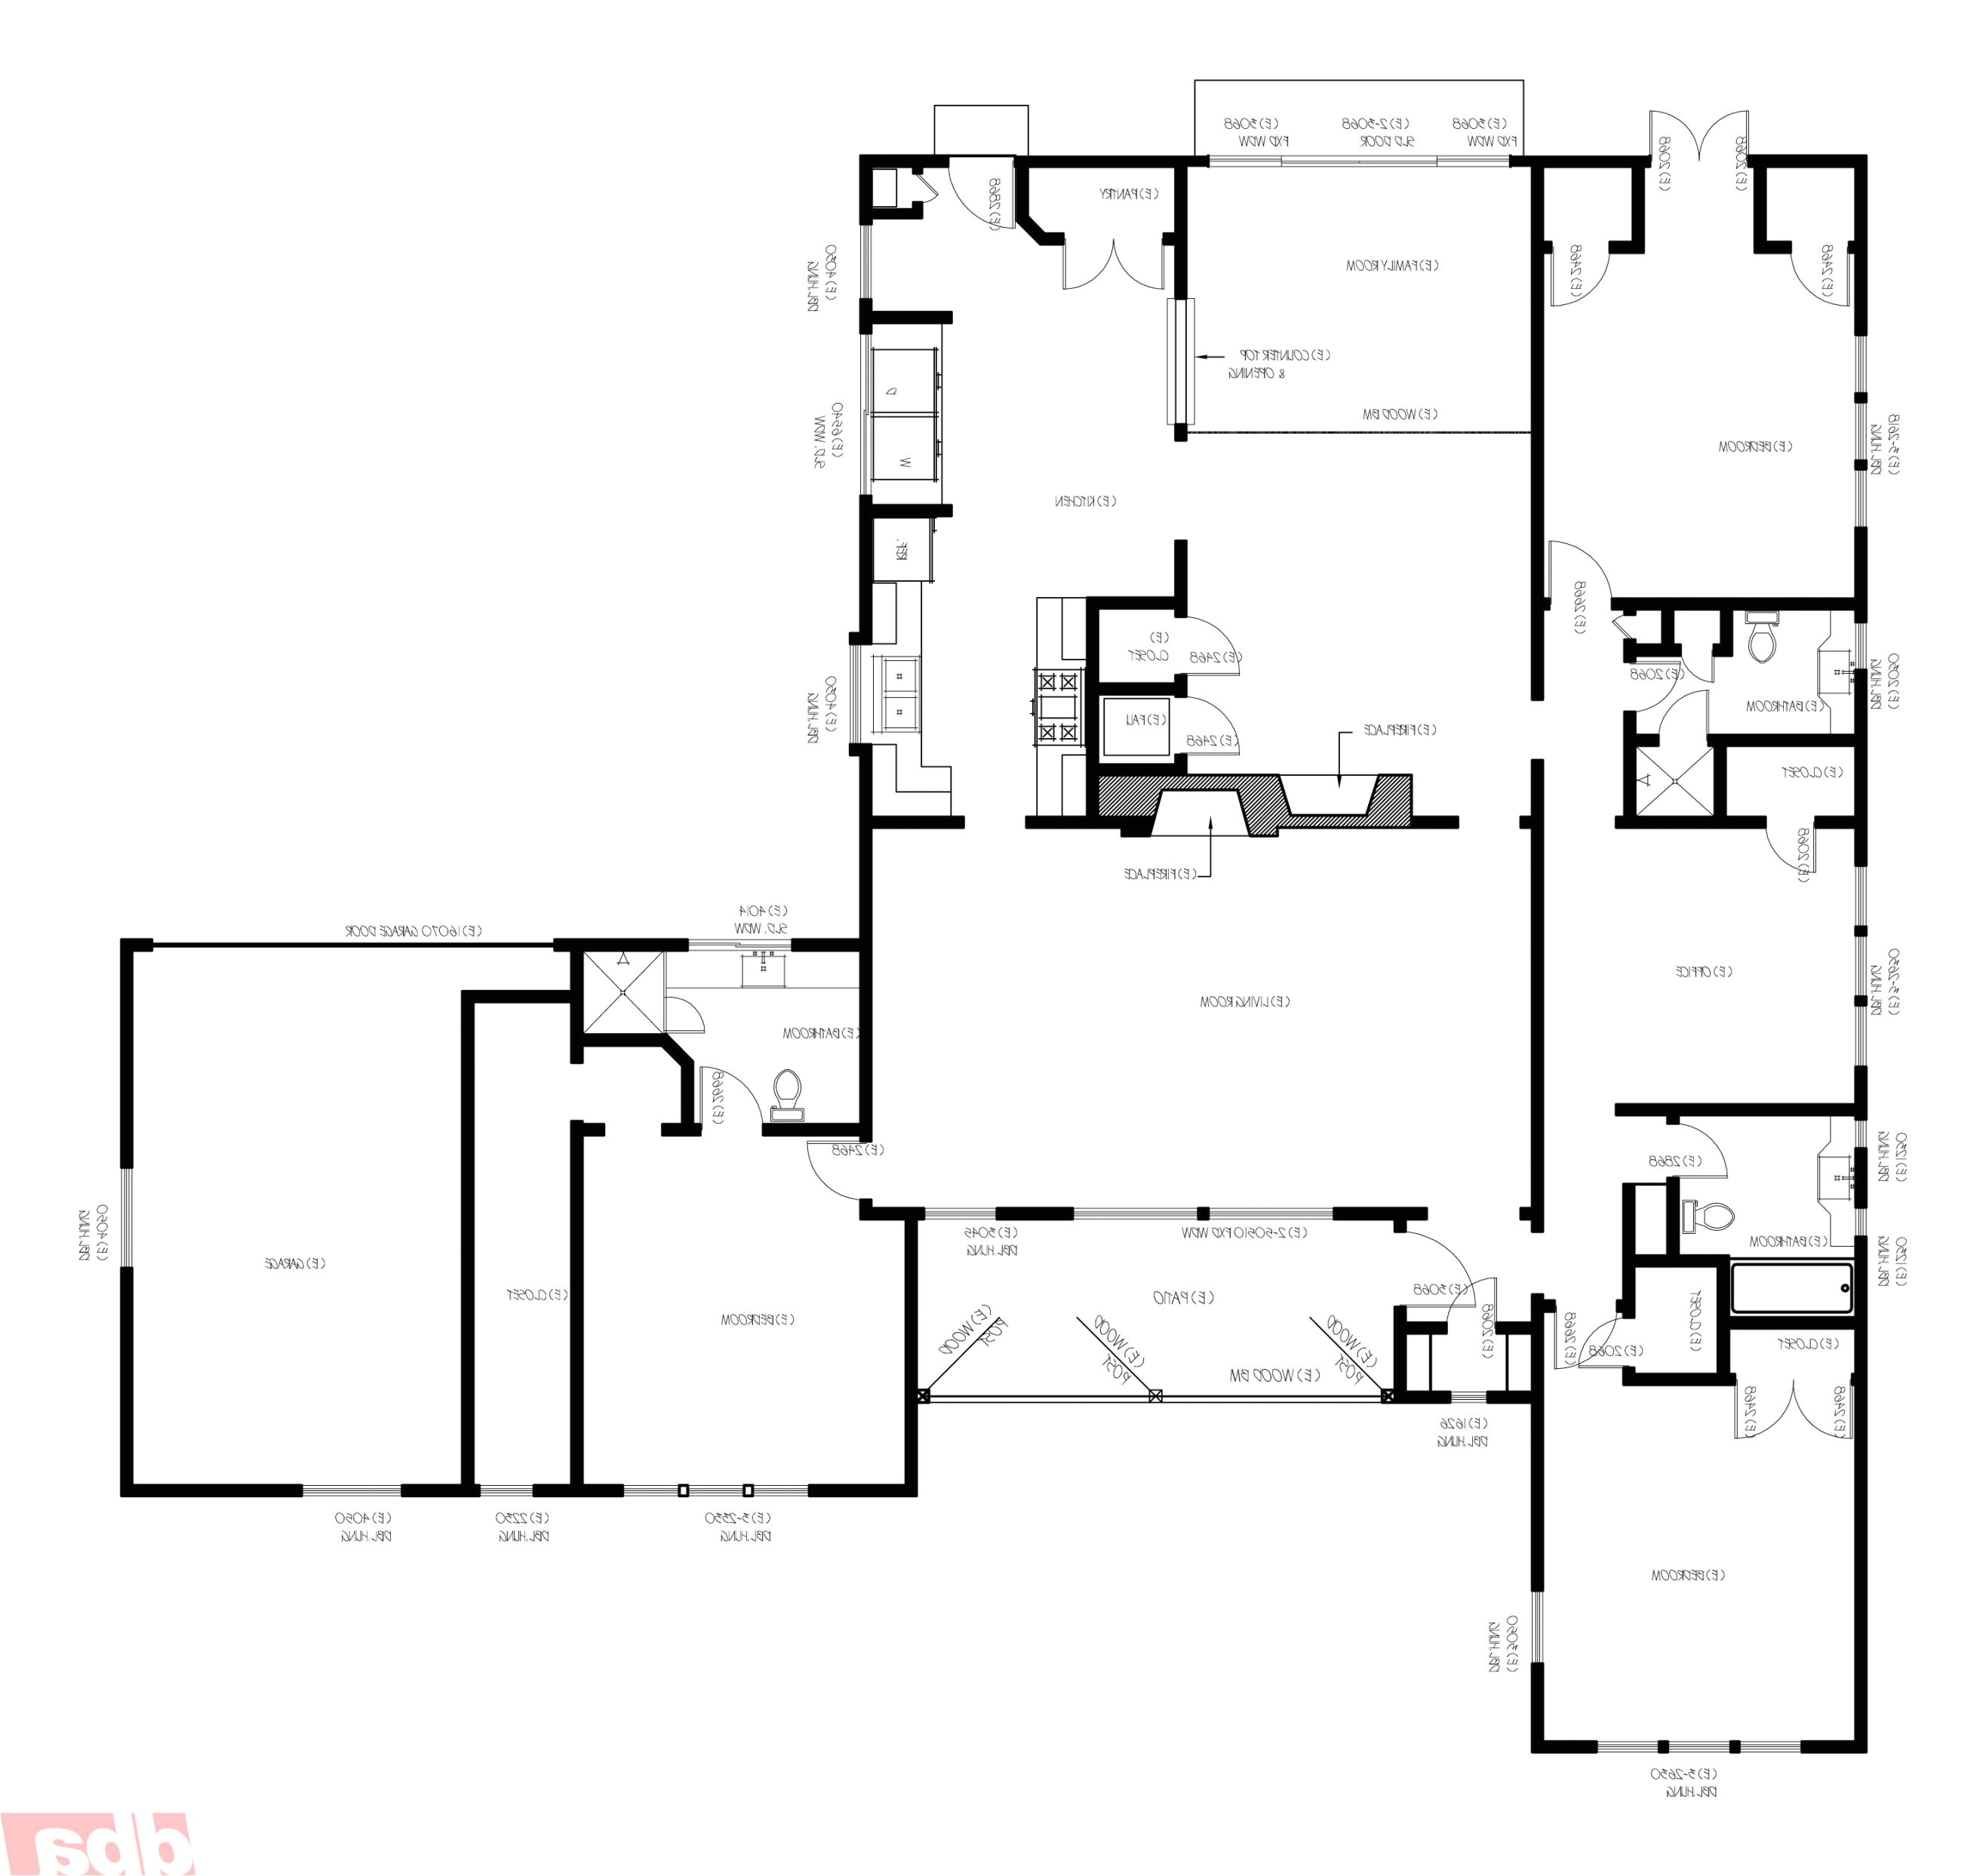 Where to Find Floor Plans Of Existing Homes How Do You Find Floor Plans On An Existing Home